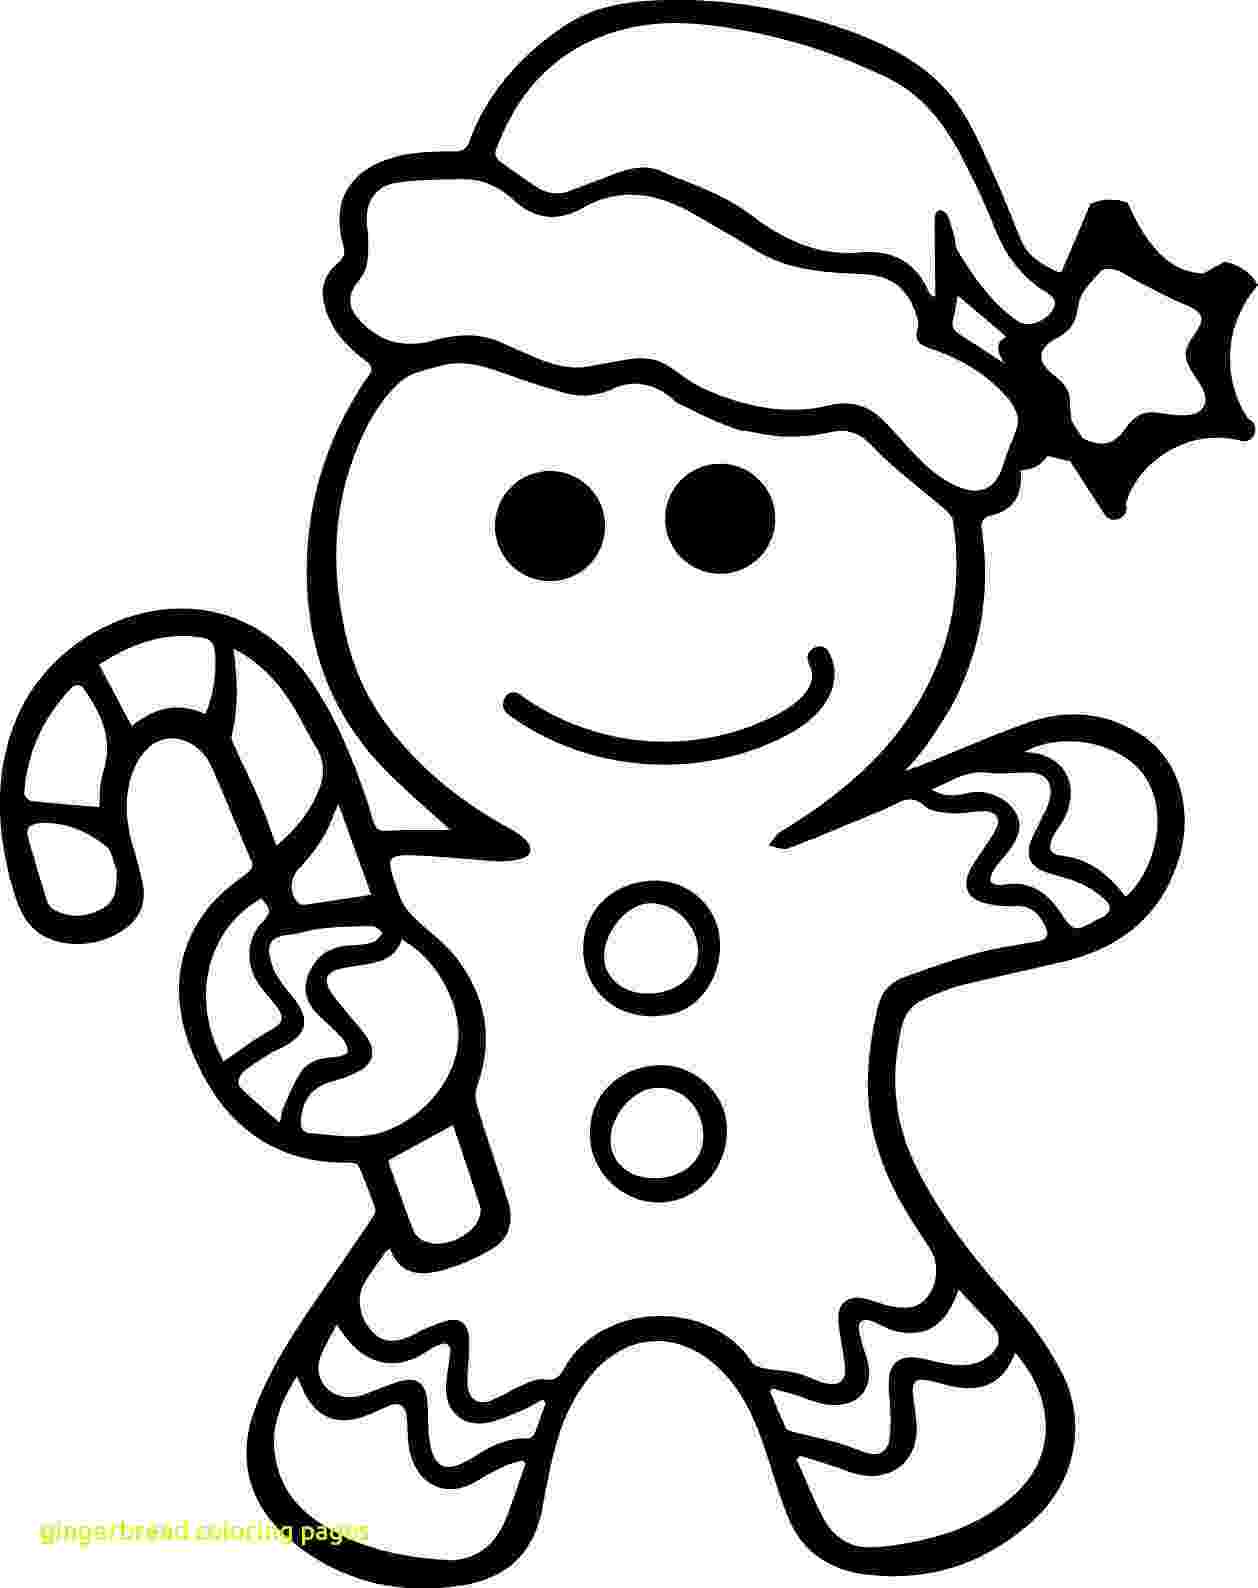 picture of gingerbread man to color gingerbread man coloring pages coloring pages for children of man picture gingerbread to color 